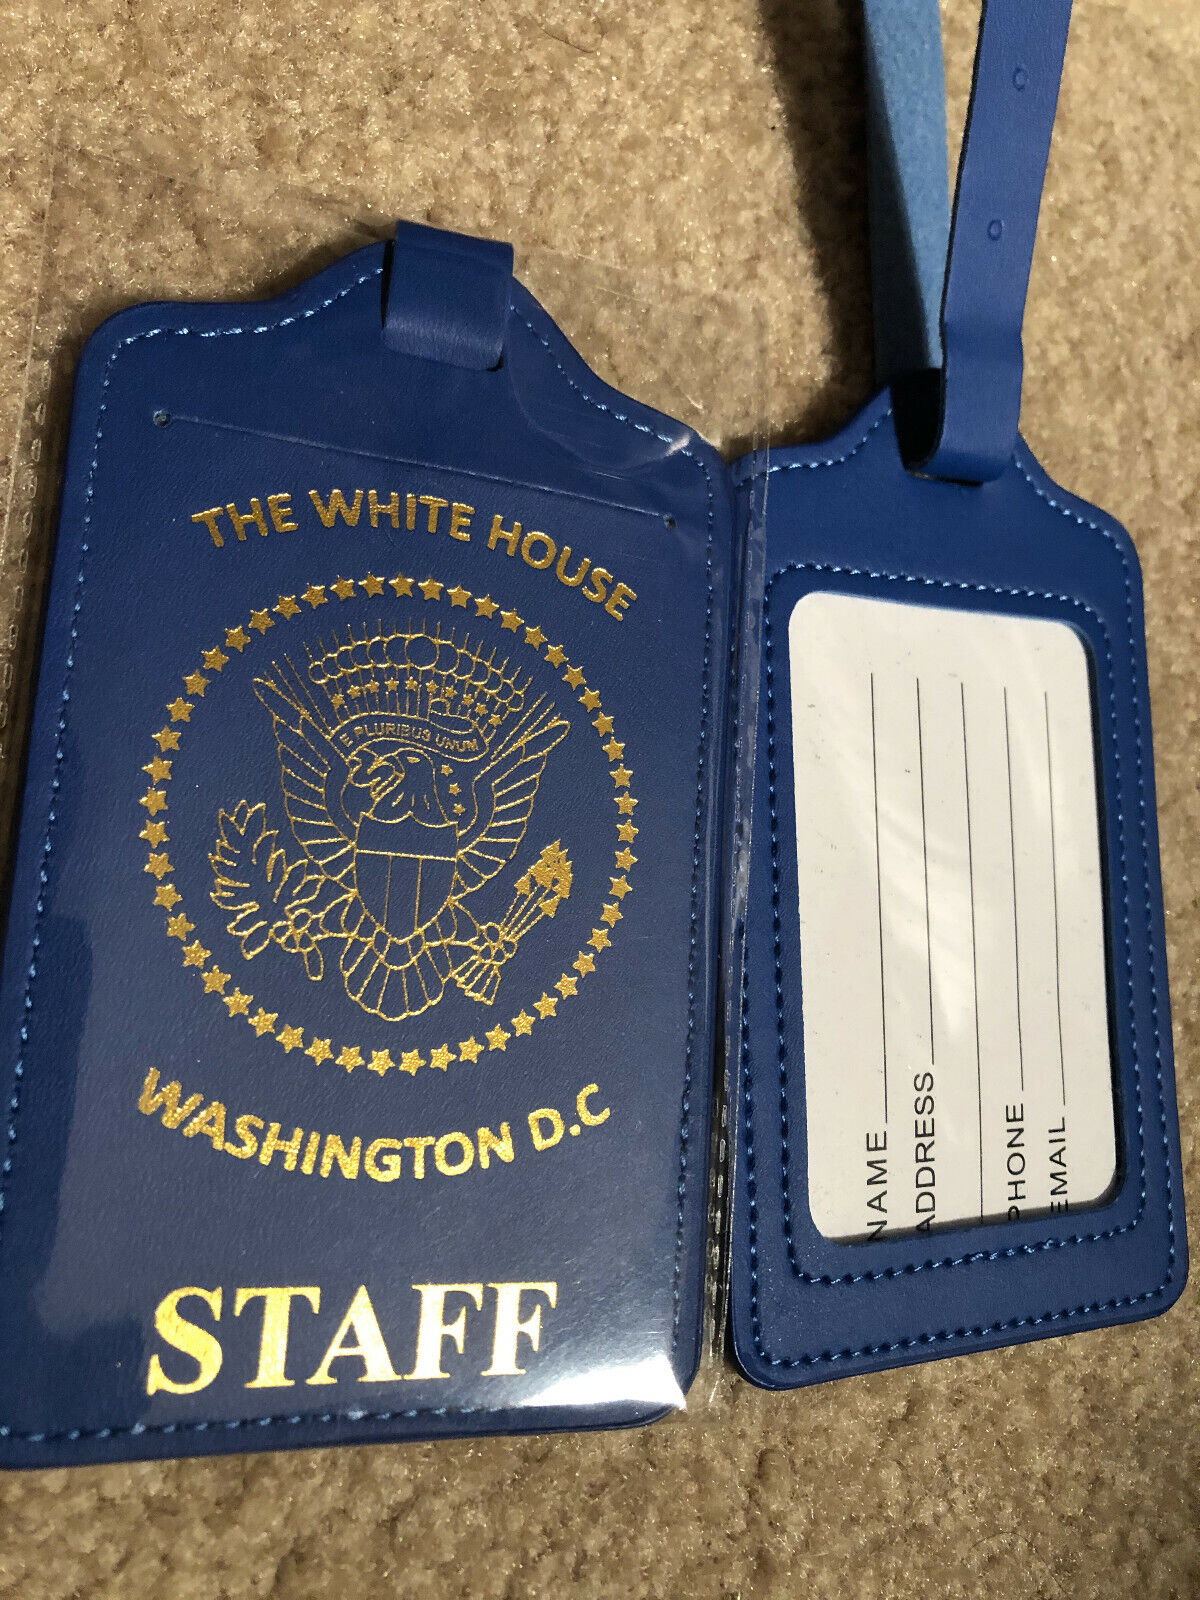 GOLD PRESIDENTIAL SEAL,BLUE WHITE HOUSE STAFF LUGGAGE TAG (SET OF THREE TAGS)